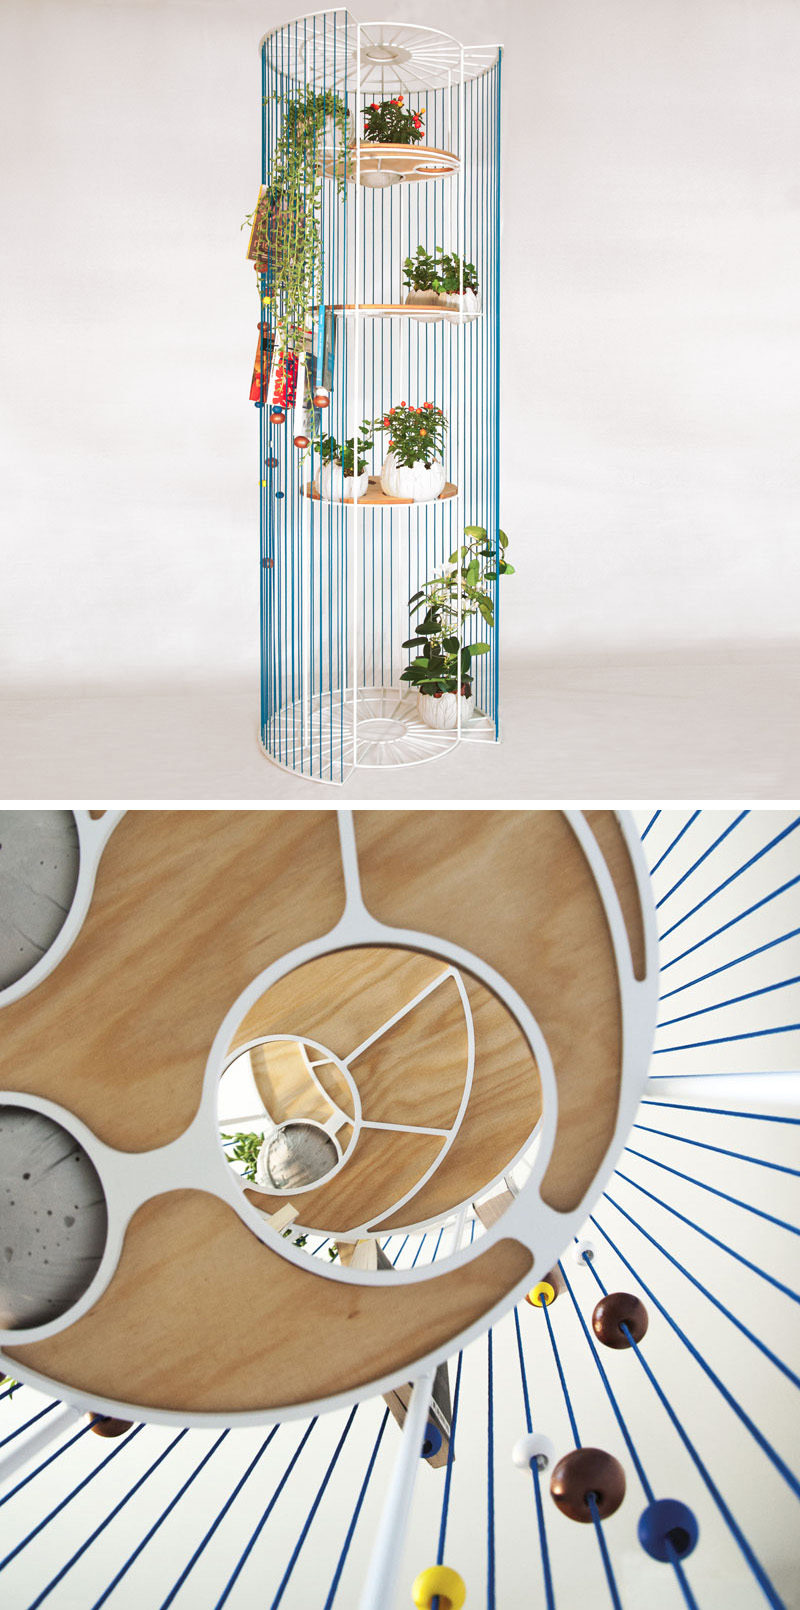 Designer Alessandra Meacci has created Bolina, a modern and multi-functional room divider, that doubles as a bookshelf and a place to display your plants.